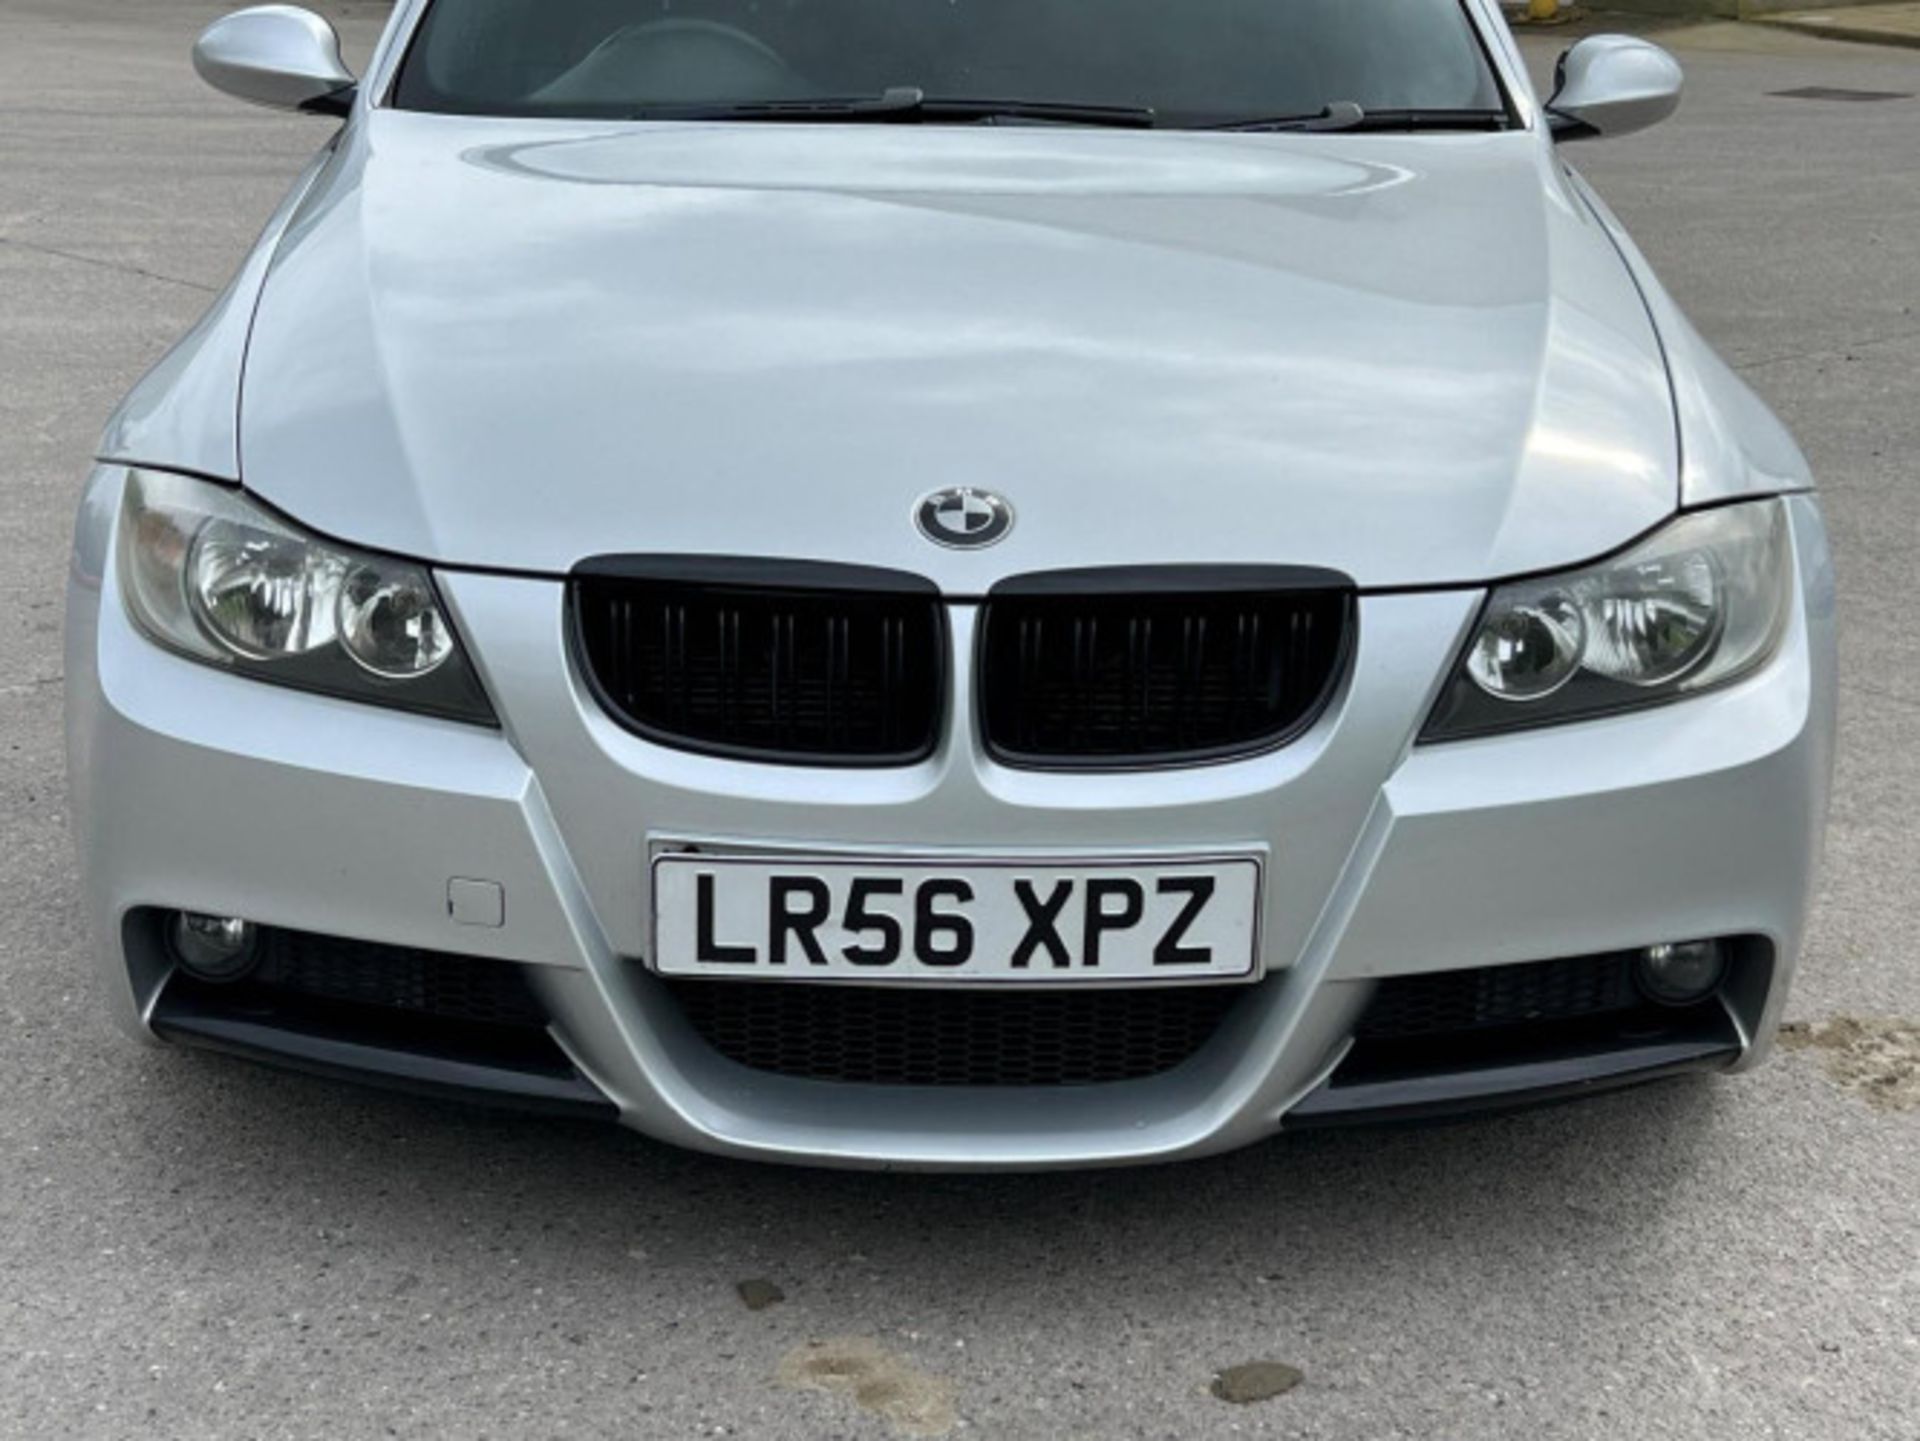 LUXURIOUS PERFORMANCE: 2006 BMW 3 SERIES 2.0 320D M SPORT AUTOMATIC >>--NO VAT ON HAMMER--<< - Image 29 of 98